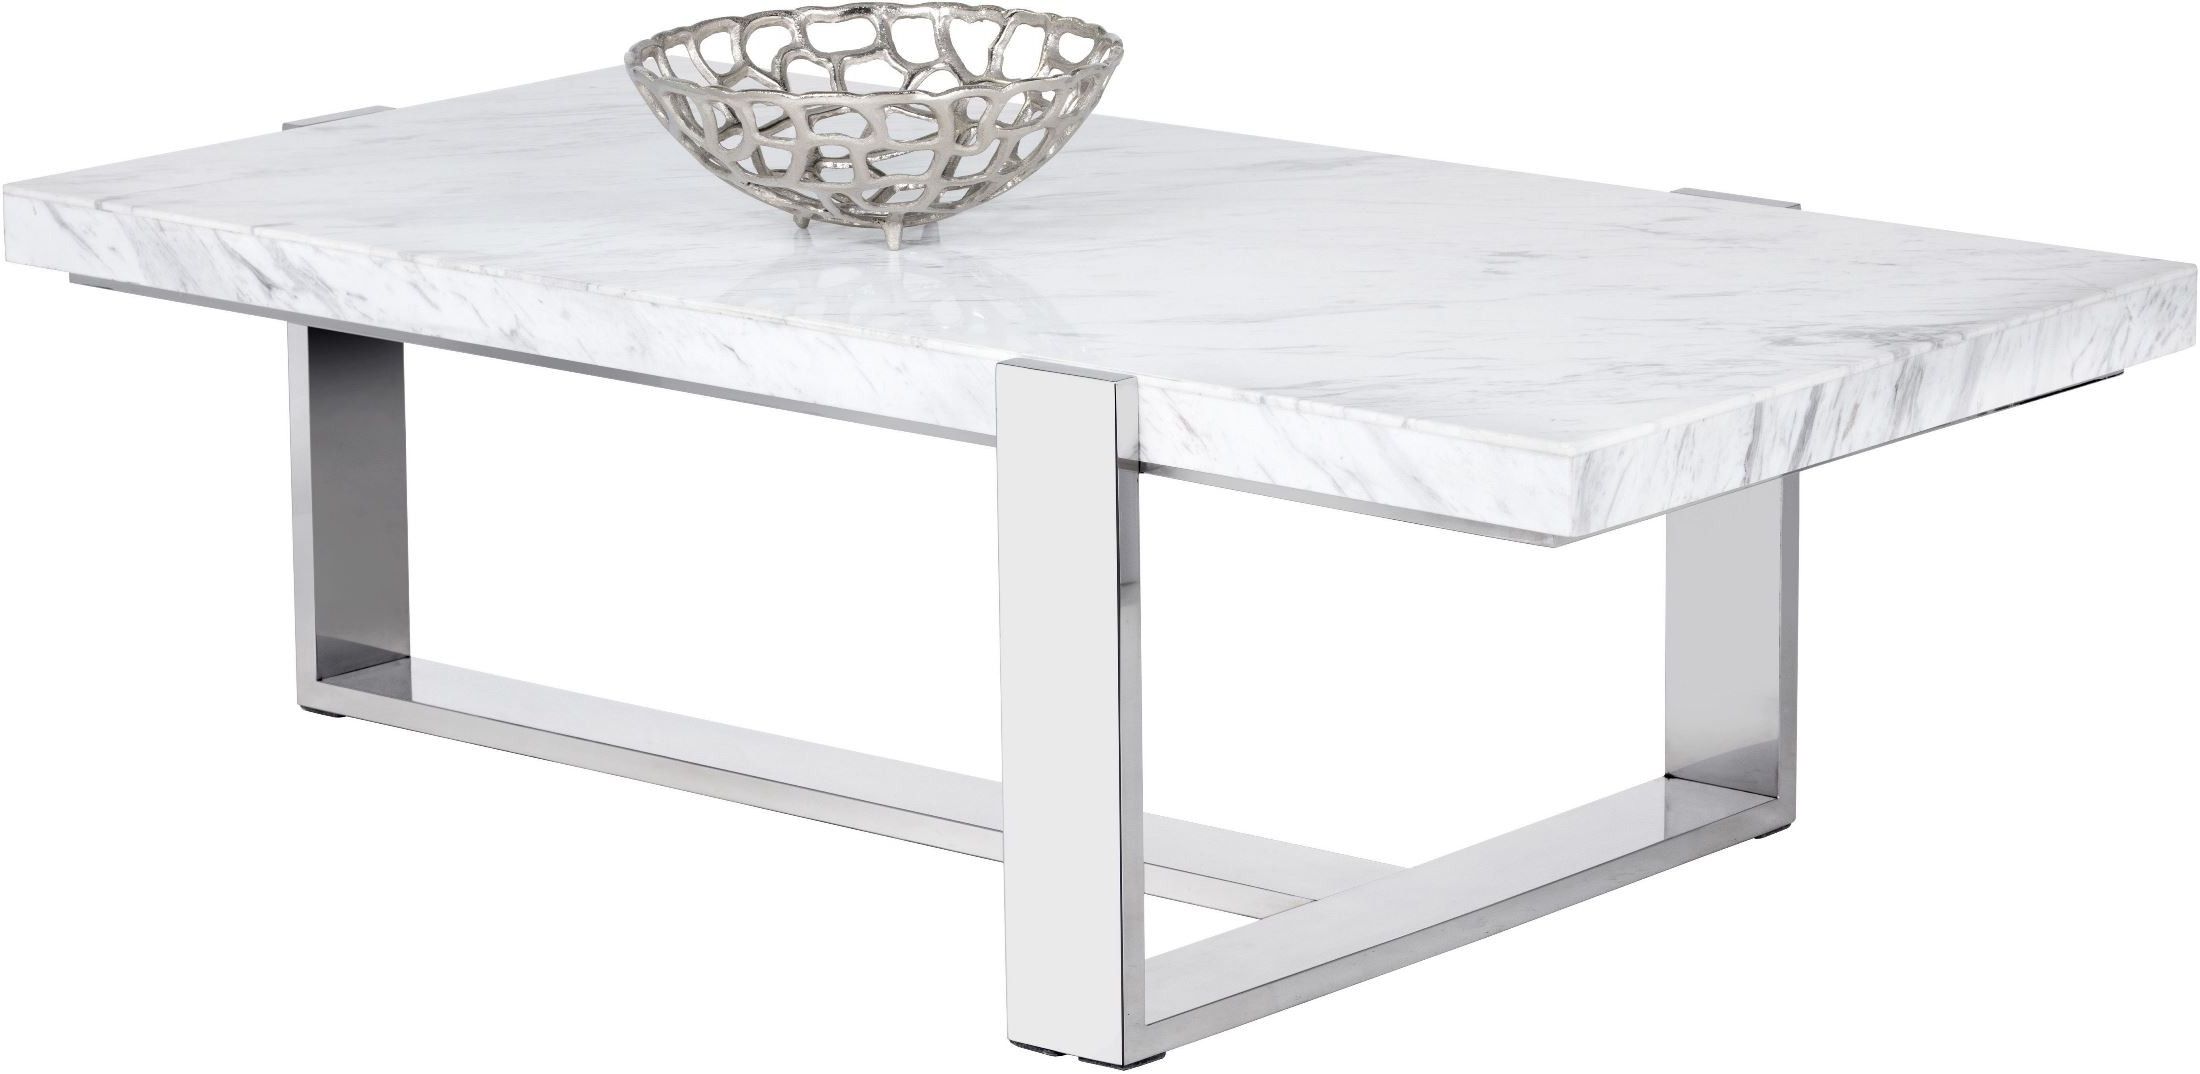 Tribecca White Marble Rectangular Coffee Table, 101294 Within Well Known Faux White Marble And Metal Coffee Tables (Gallery 13 of 20)